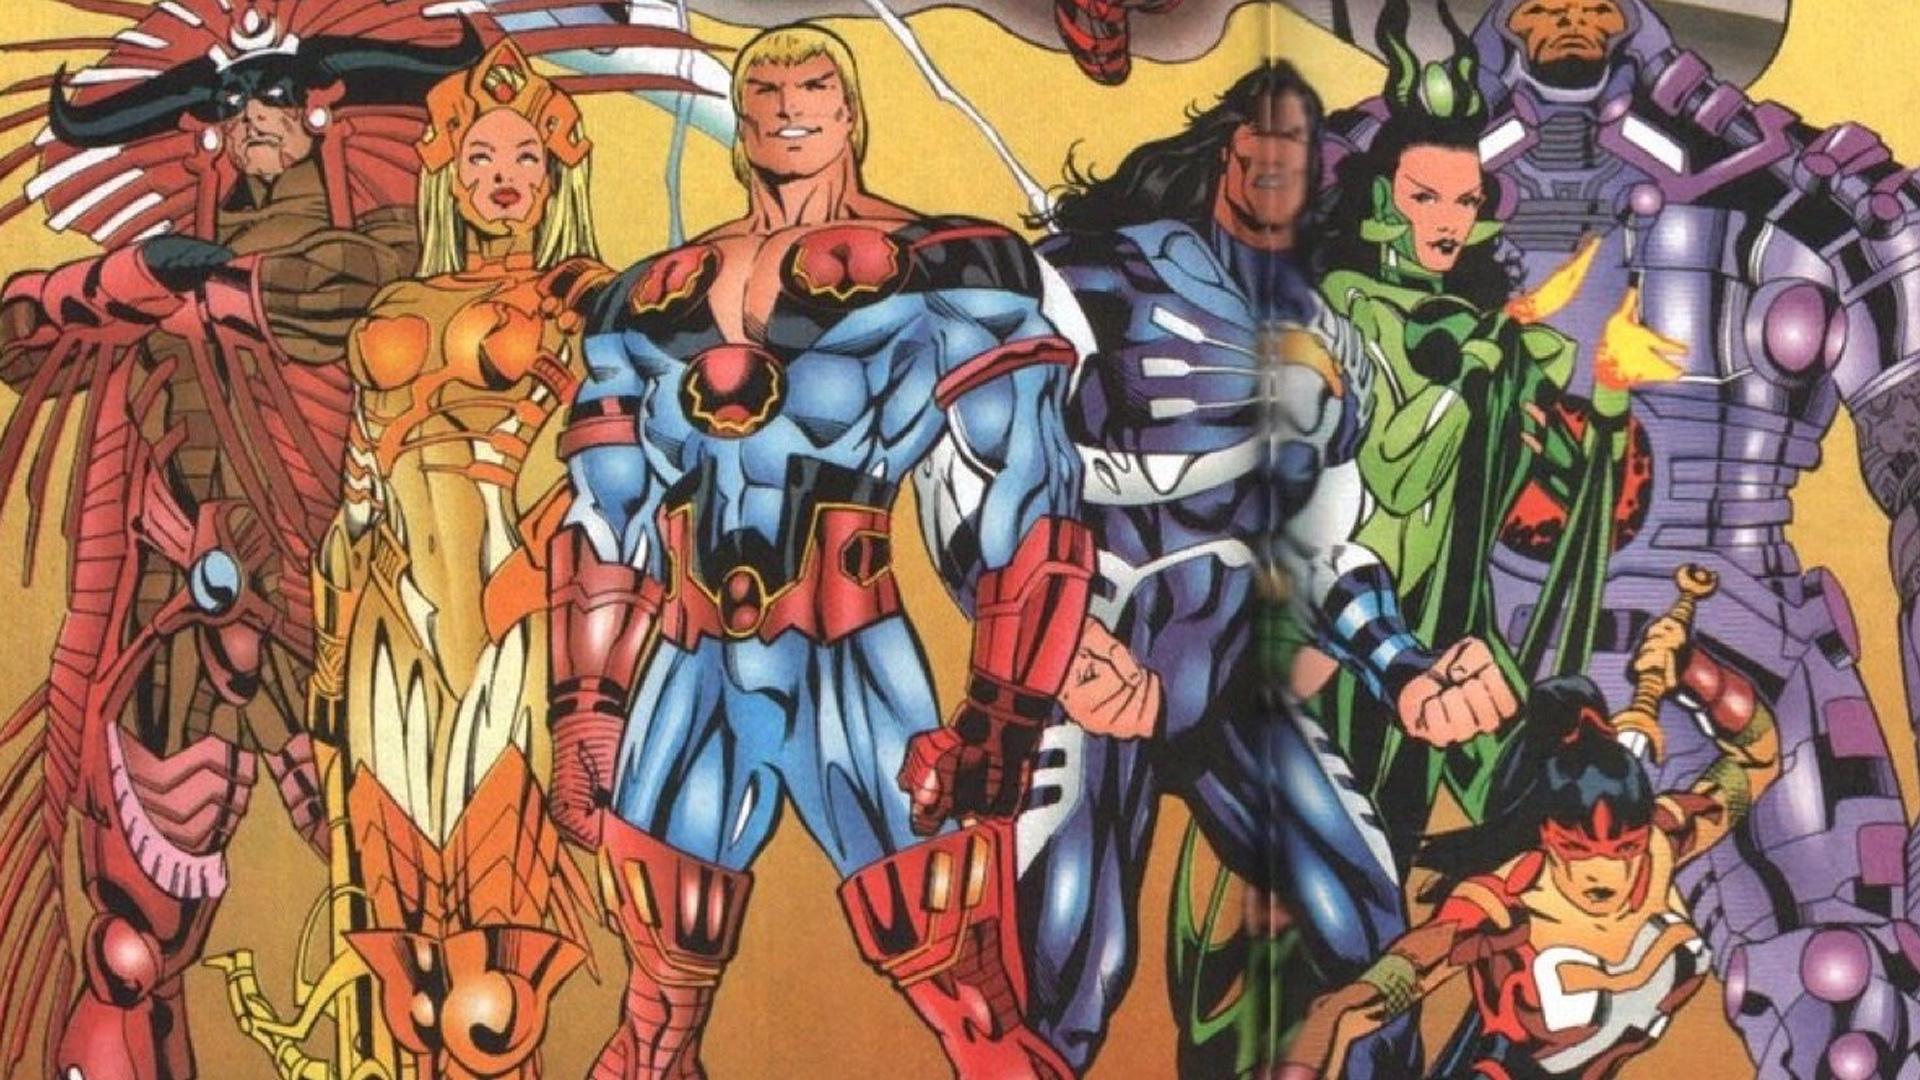 Kevin Feige Discusses THE ETERNALS and Says It Could Span